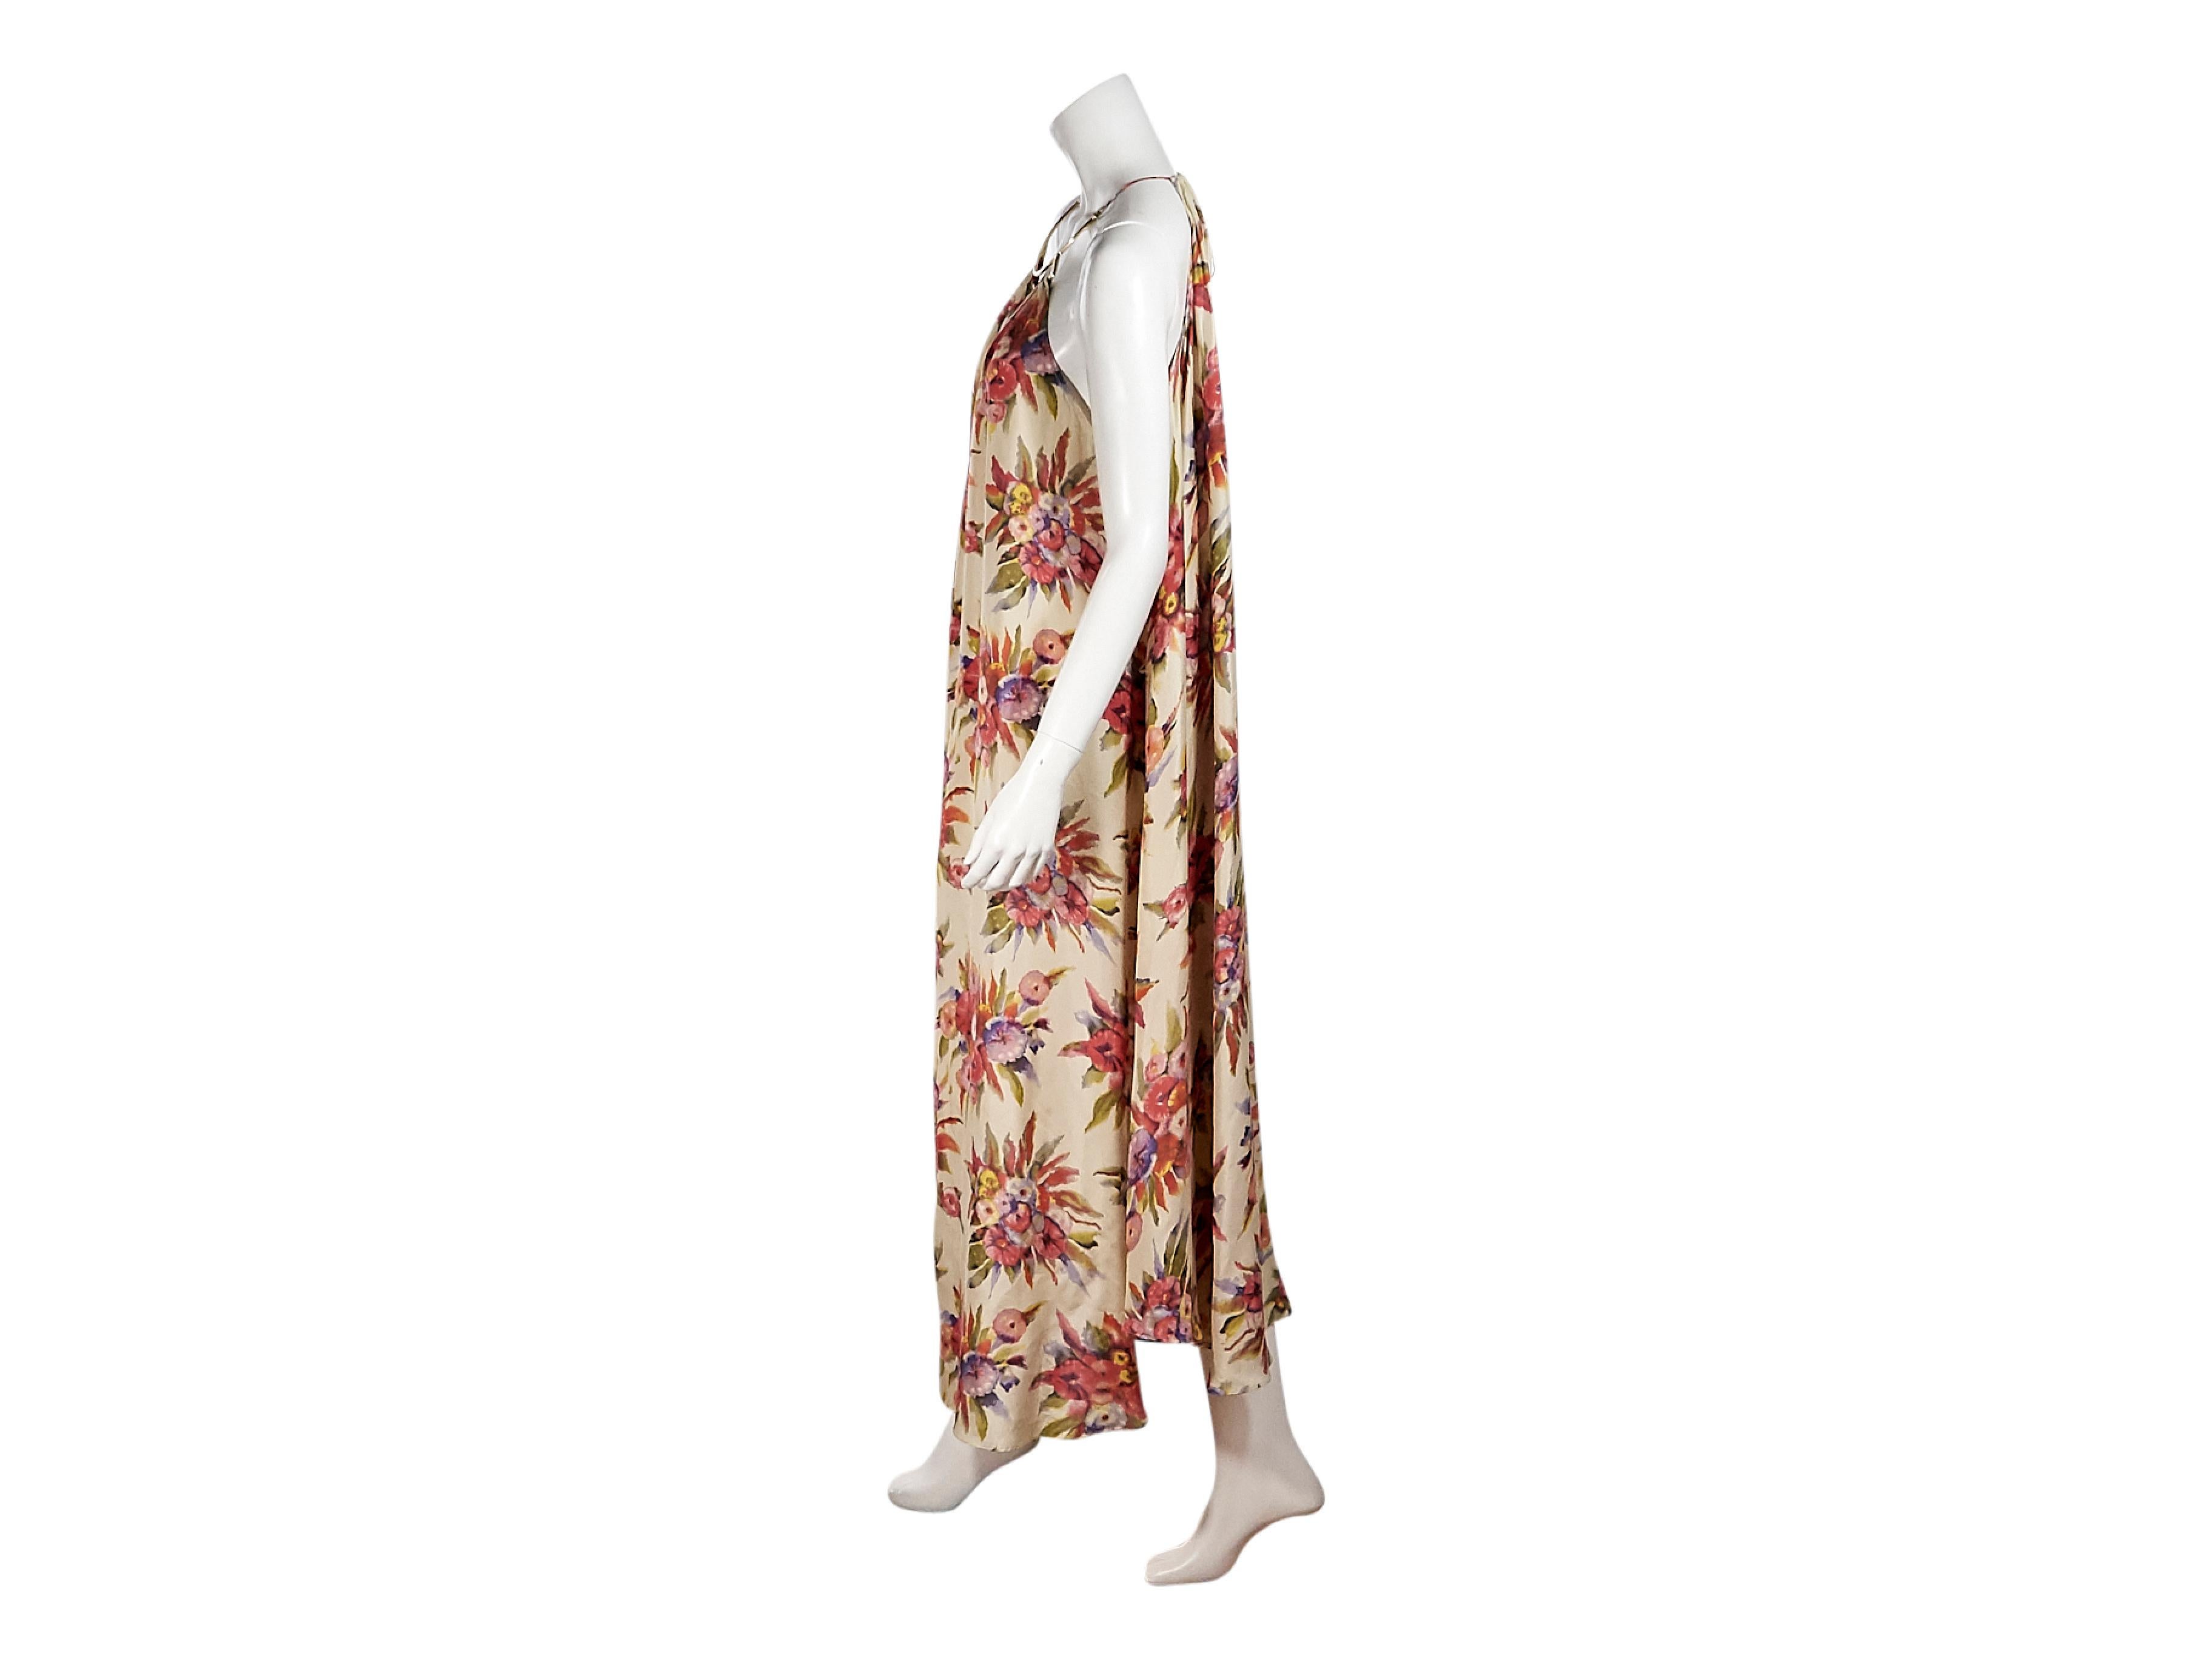 Product details:  Multicolor floral-printed silk maxi dress by Zimmermann.  Necklace collar with self-tie back straps.  Deep front slit off neckline.  Goldtone hardware.  40